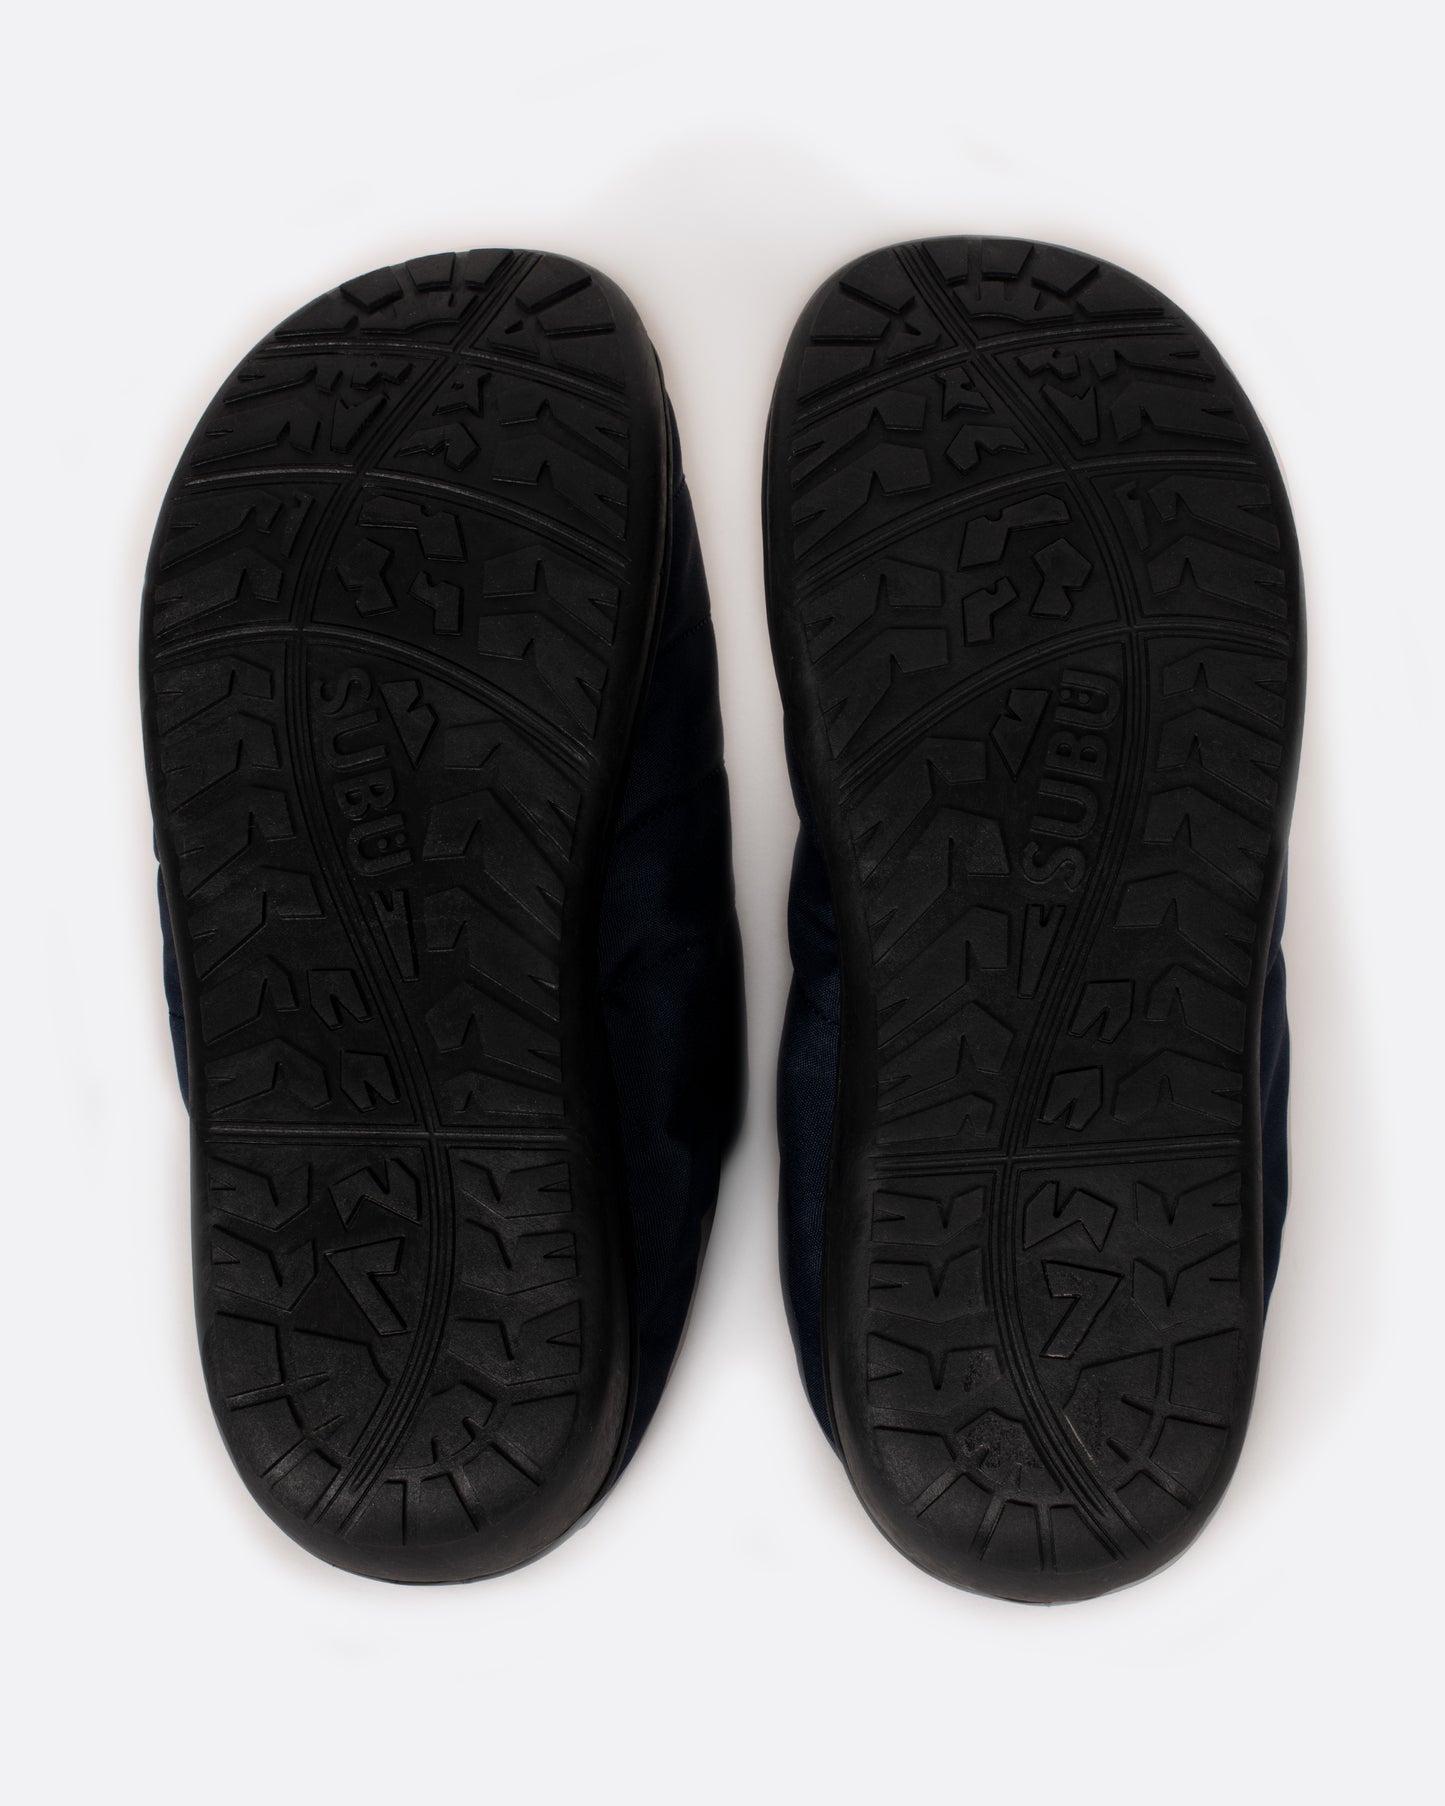 Black rubber soles of Subu slippers.